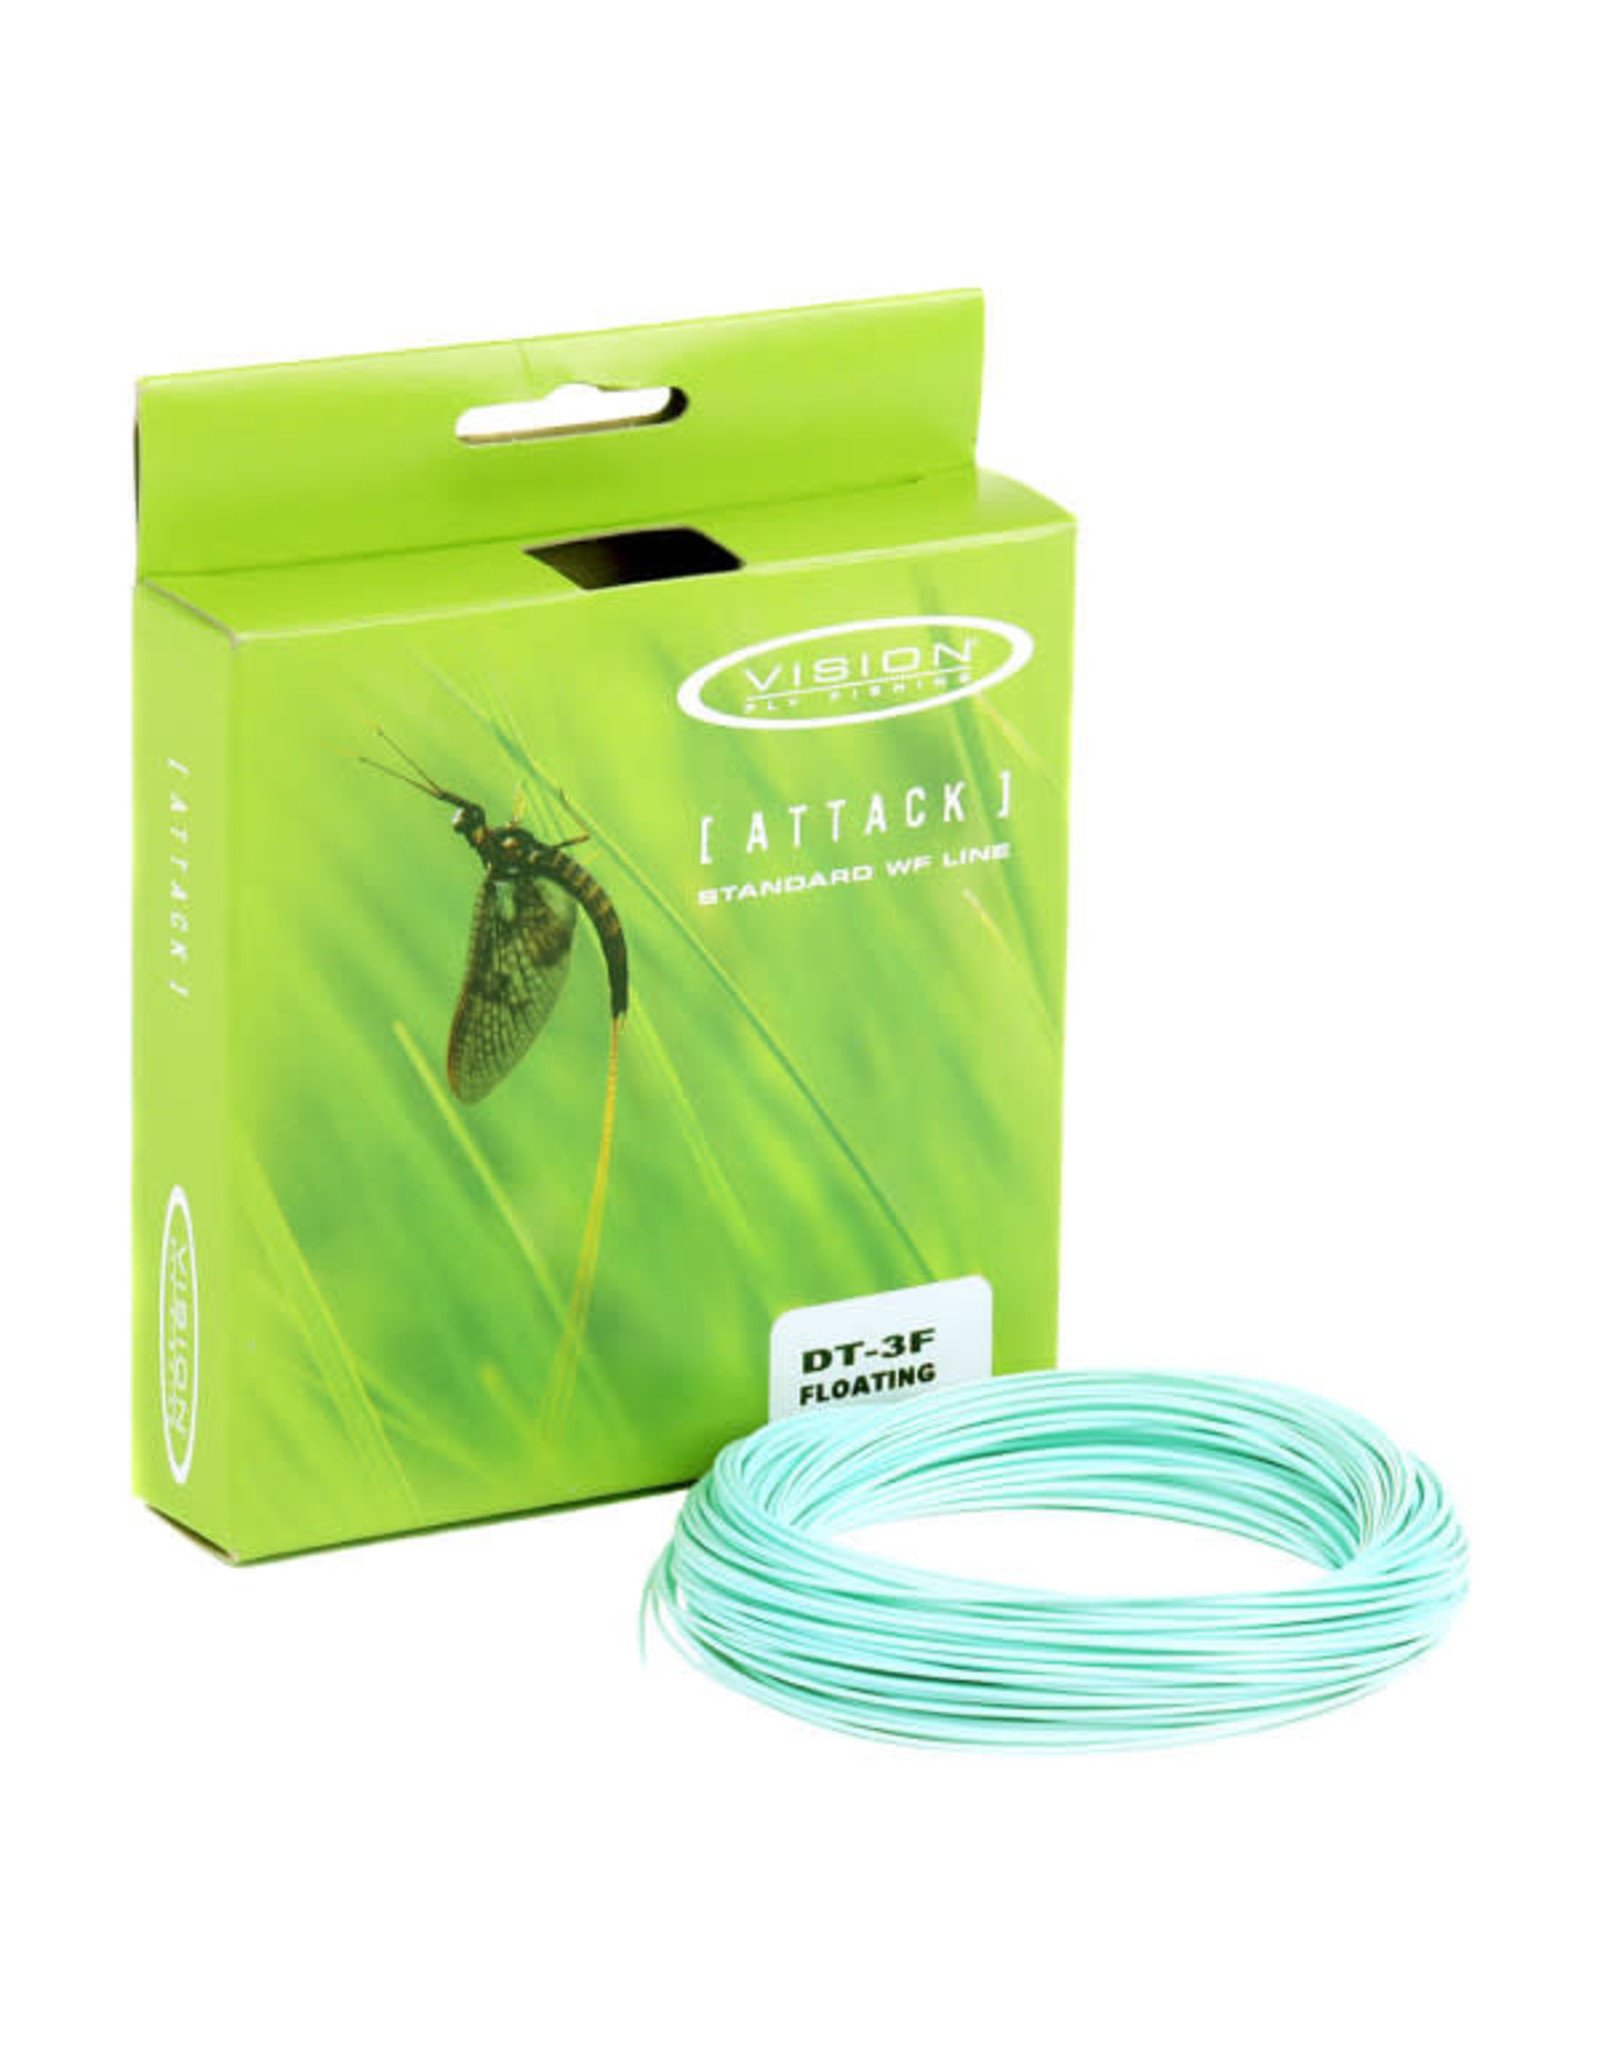 VISION FLY FISHING ATTACK DT FLOATING FLY LINE